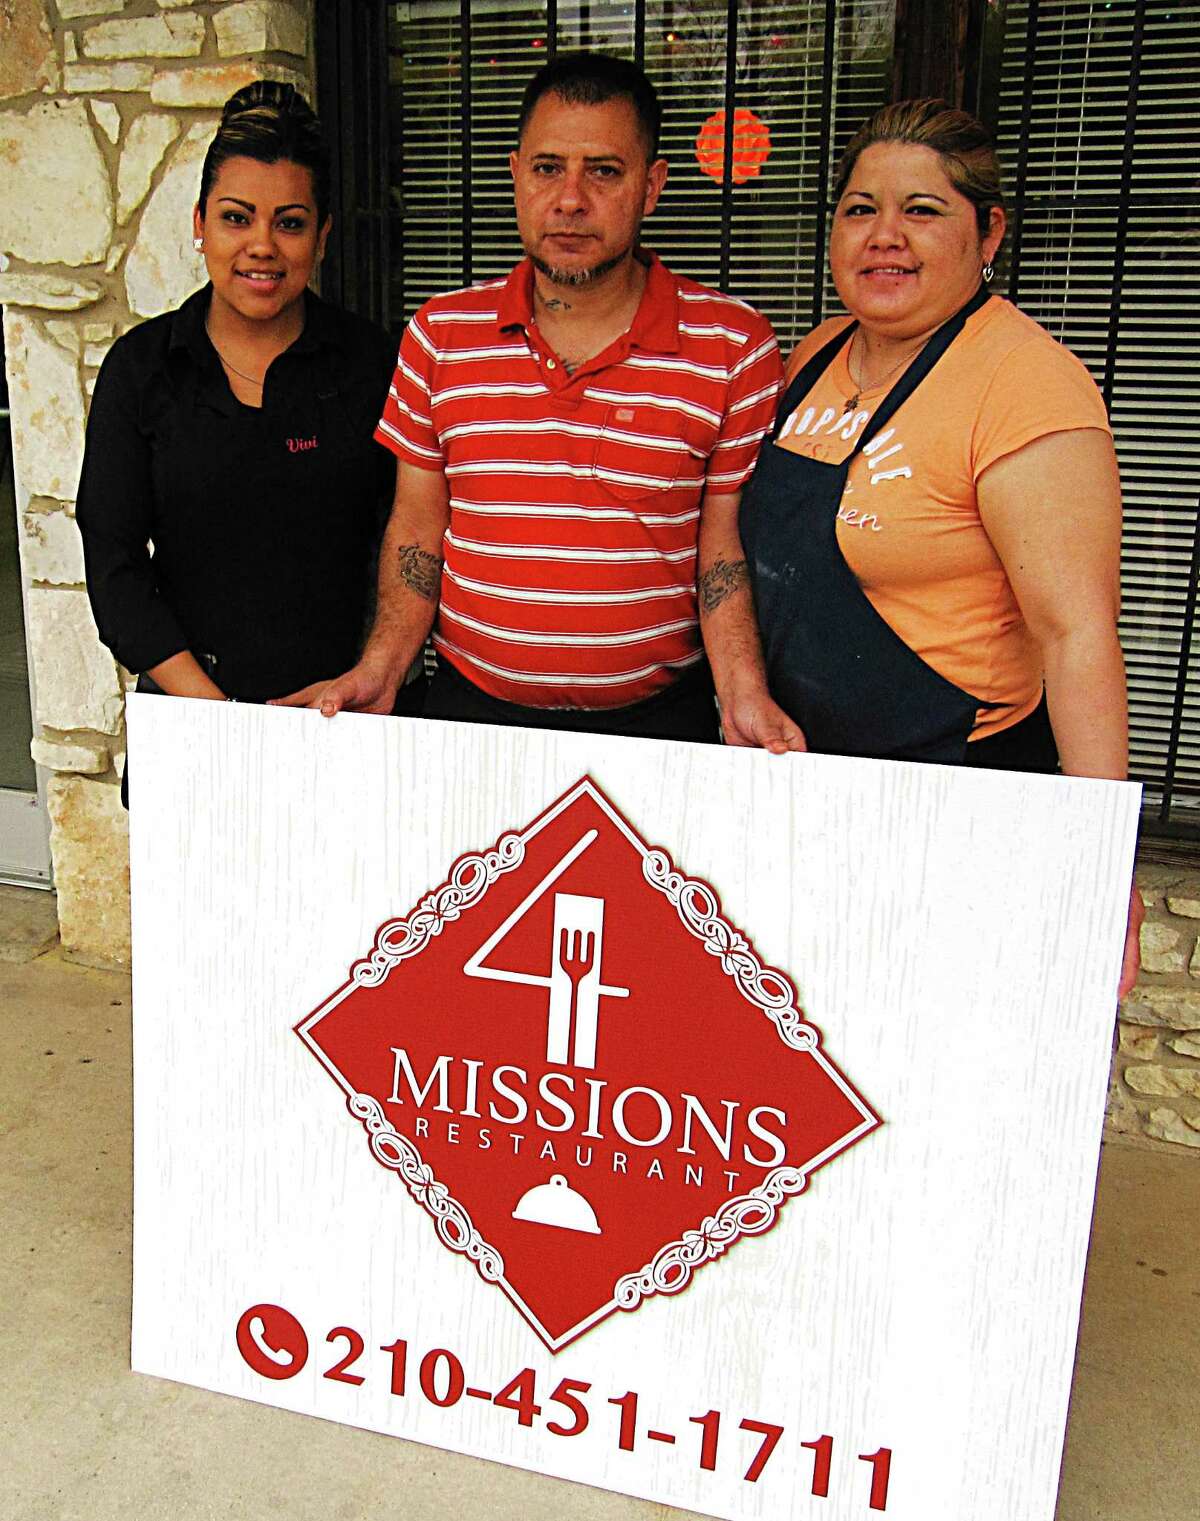 Two years after it opened, the new signs are finally ready to go up for 4 Missions Cafe. From left: server Viviana Garcia and owners Eloy and Irma Gomez.